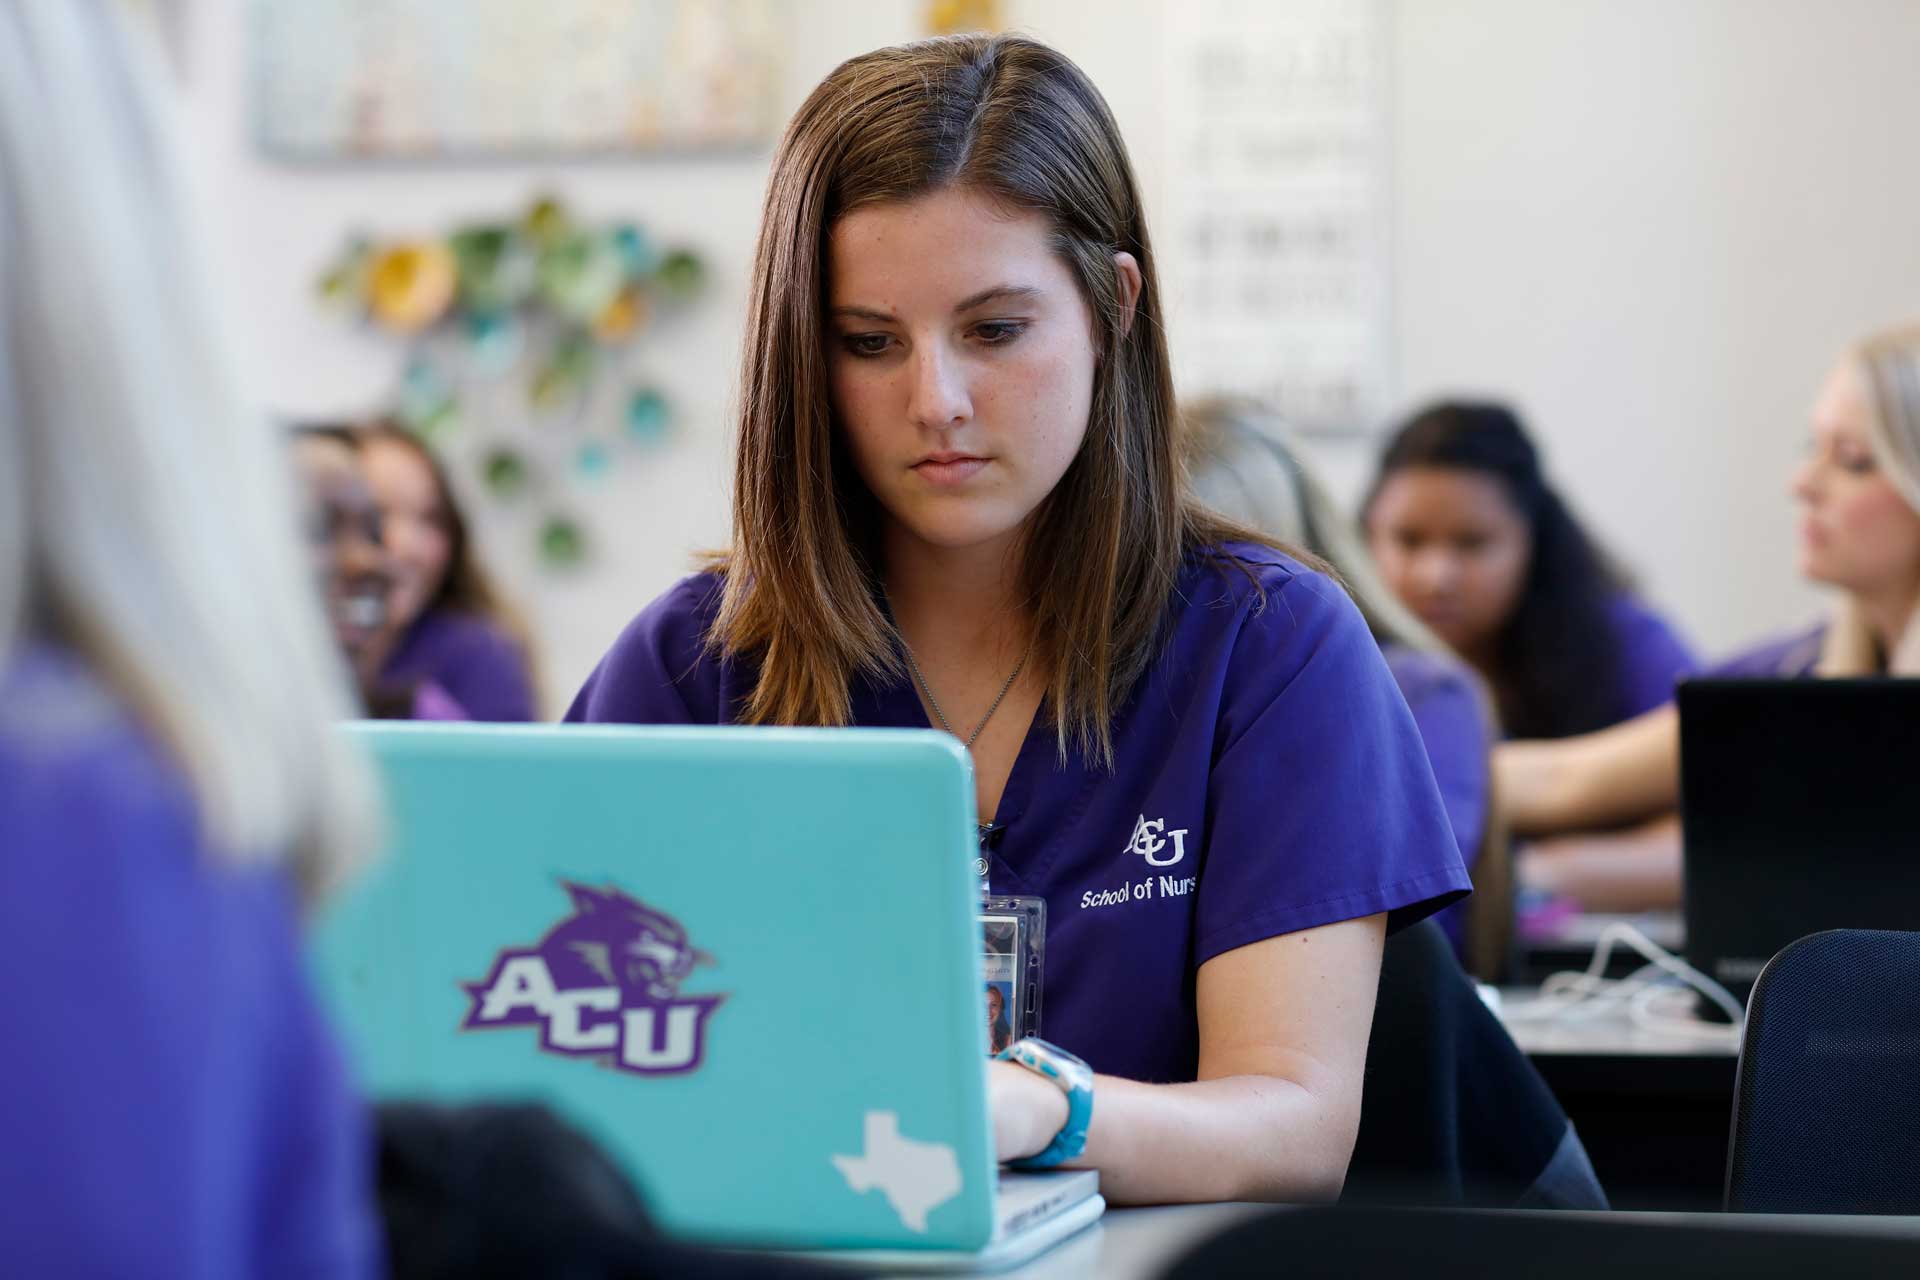 An ACU graduate student taking online classes on her laptop with other students